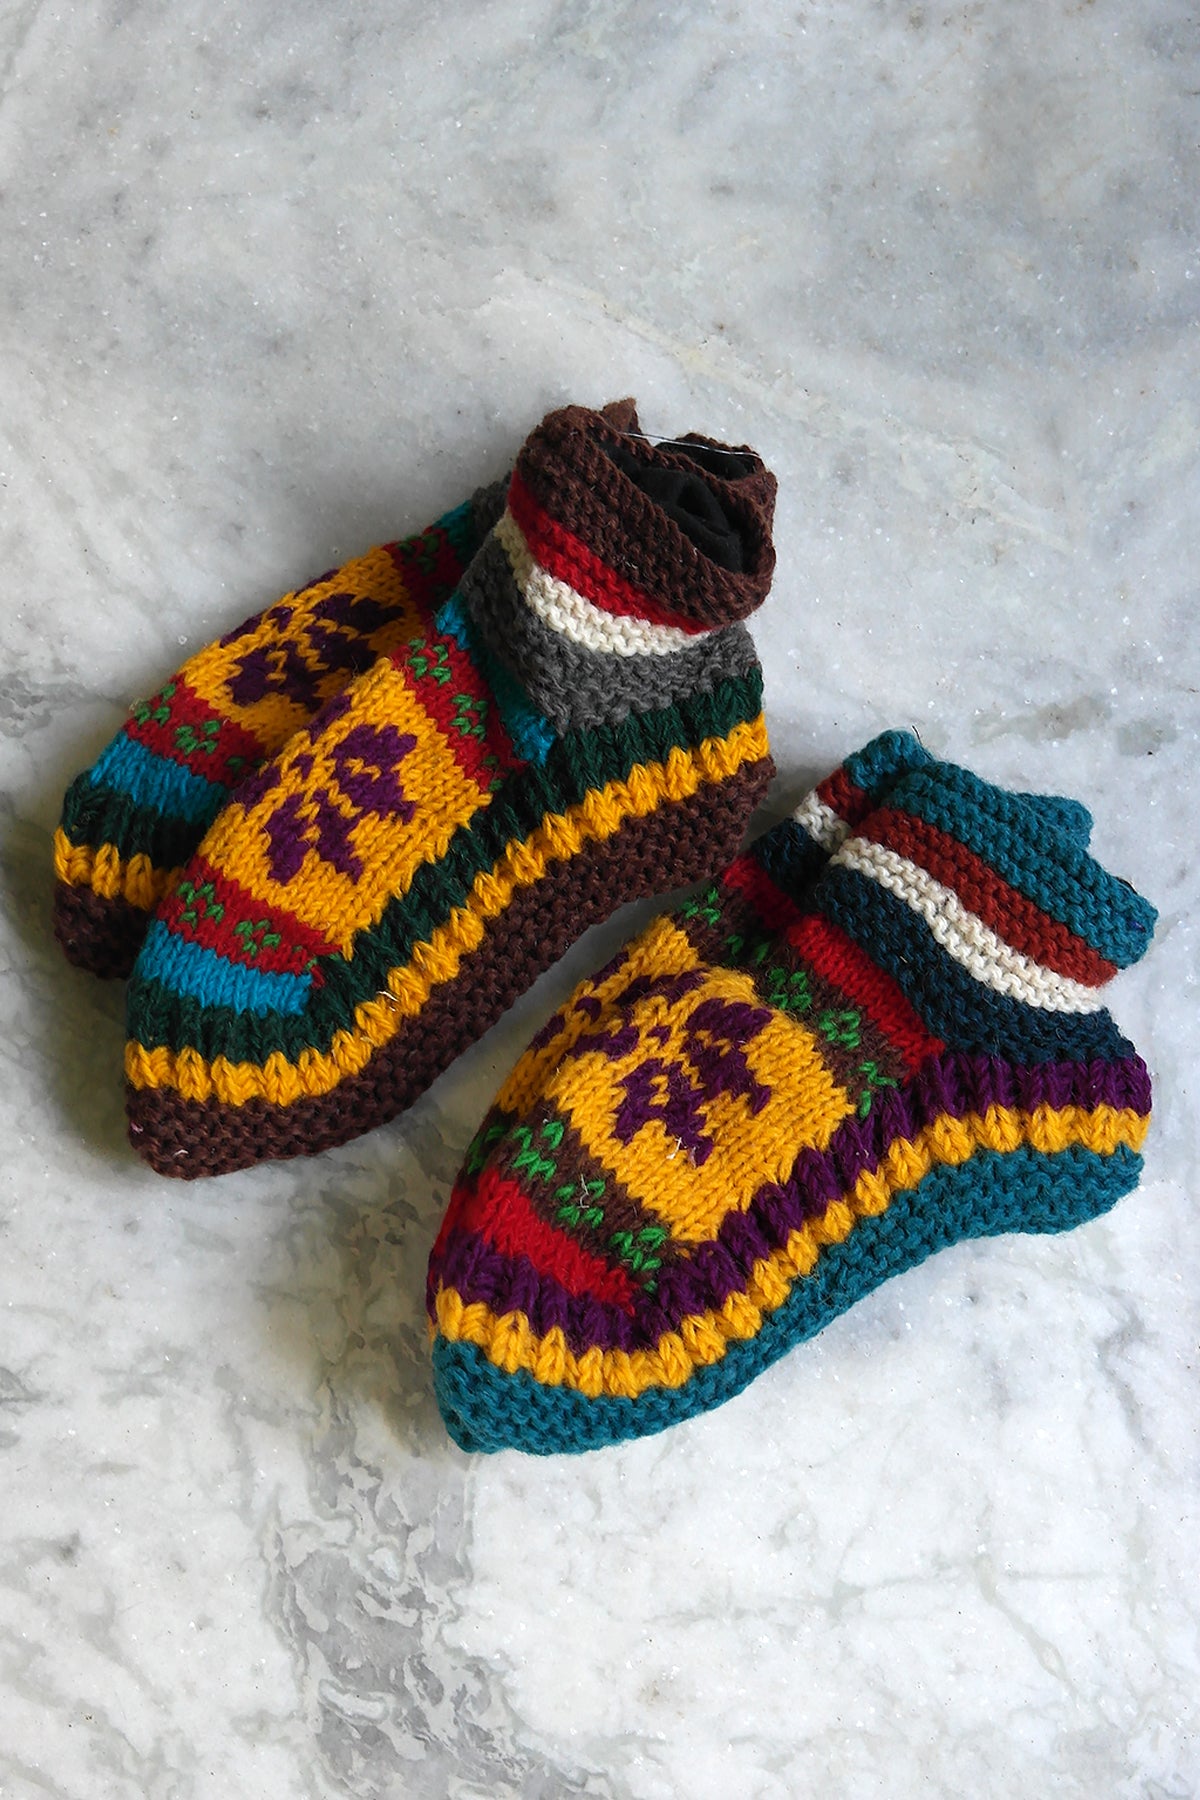 Snow Flake pattern assorted colors woolen hand knitted ankle socks